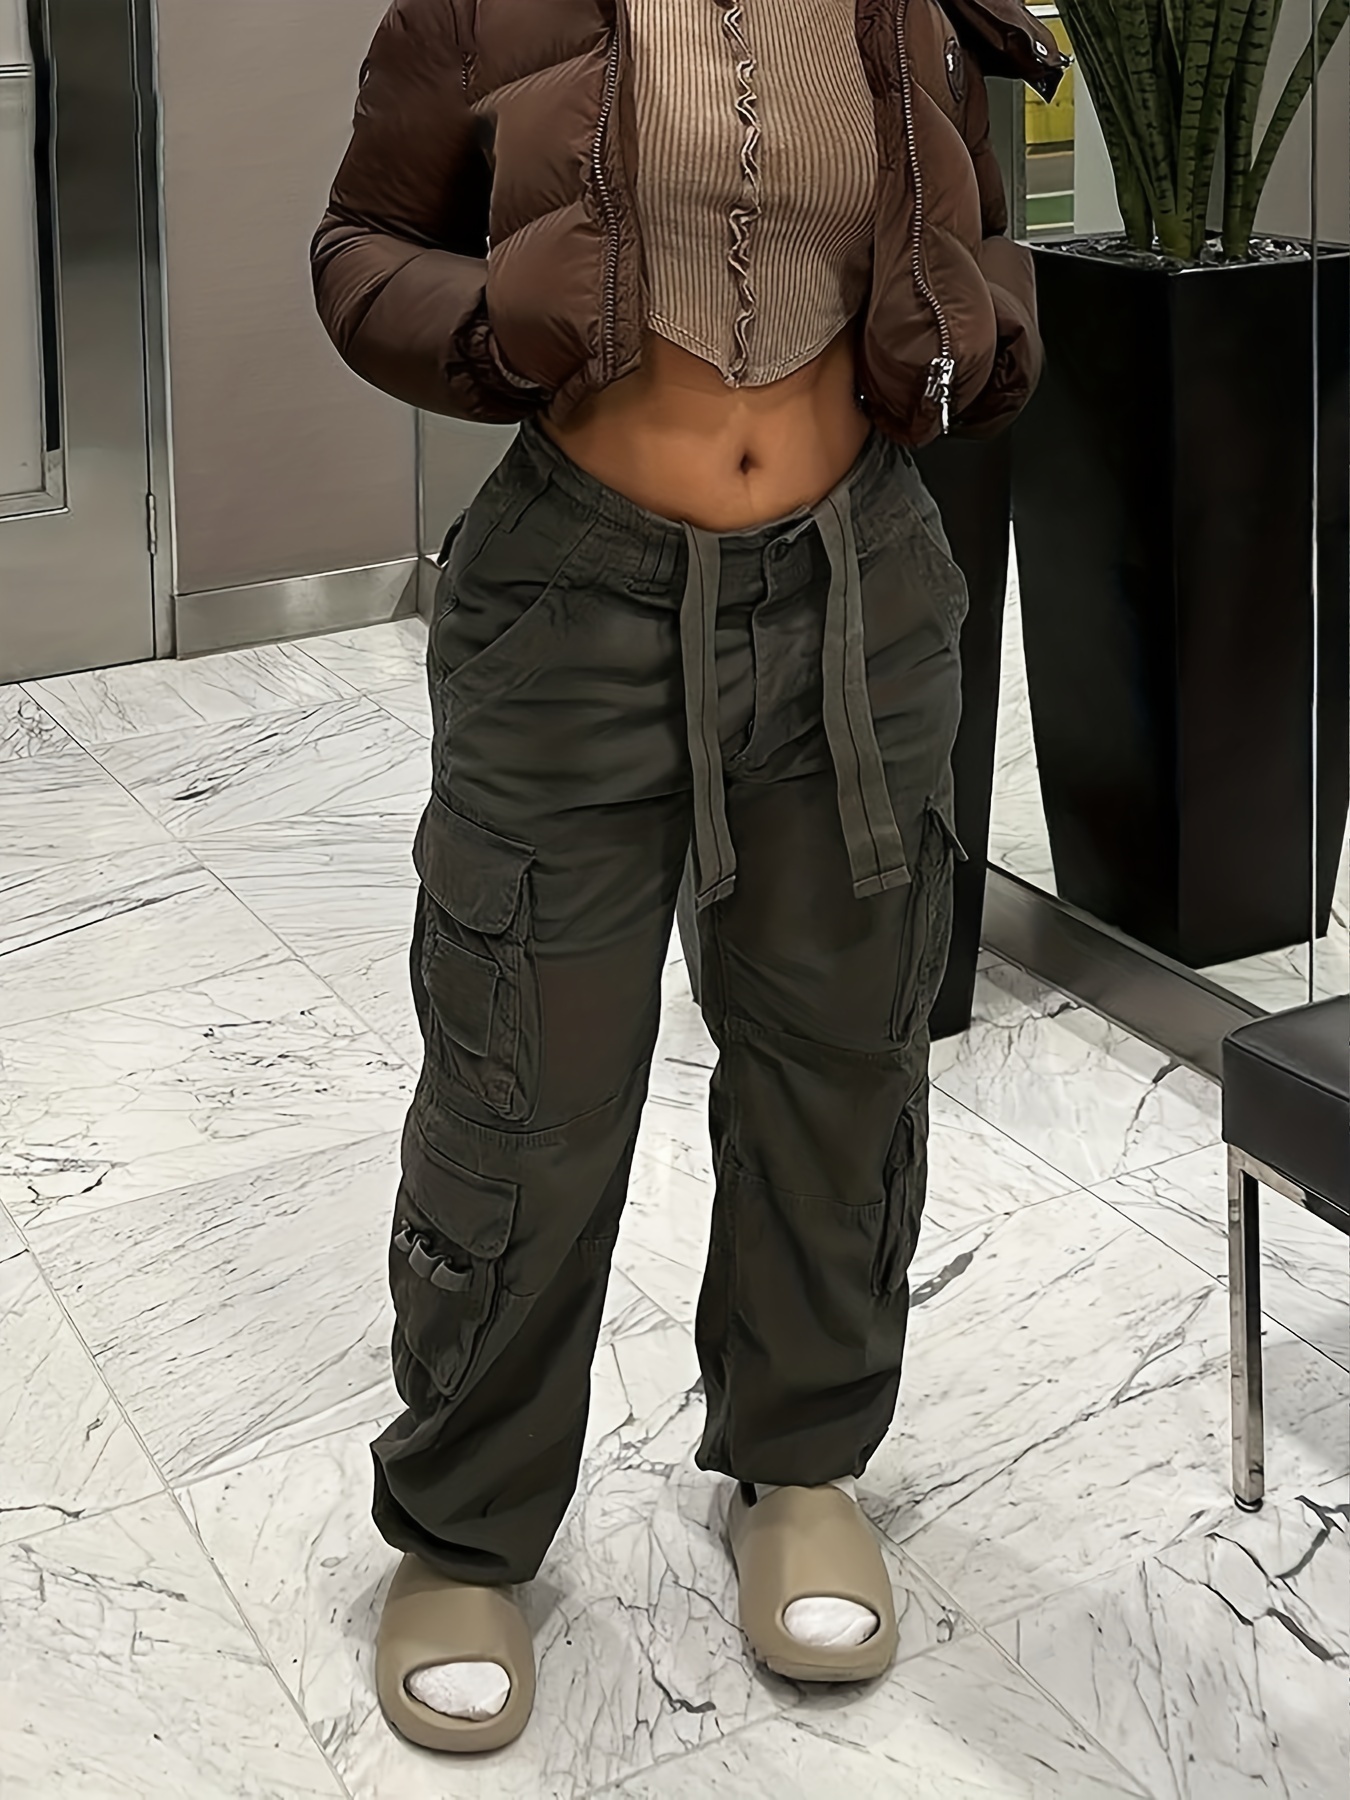 90s Trousers with a Crop Top and Space Boots.